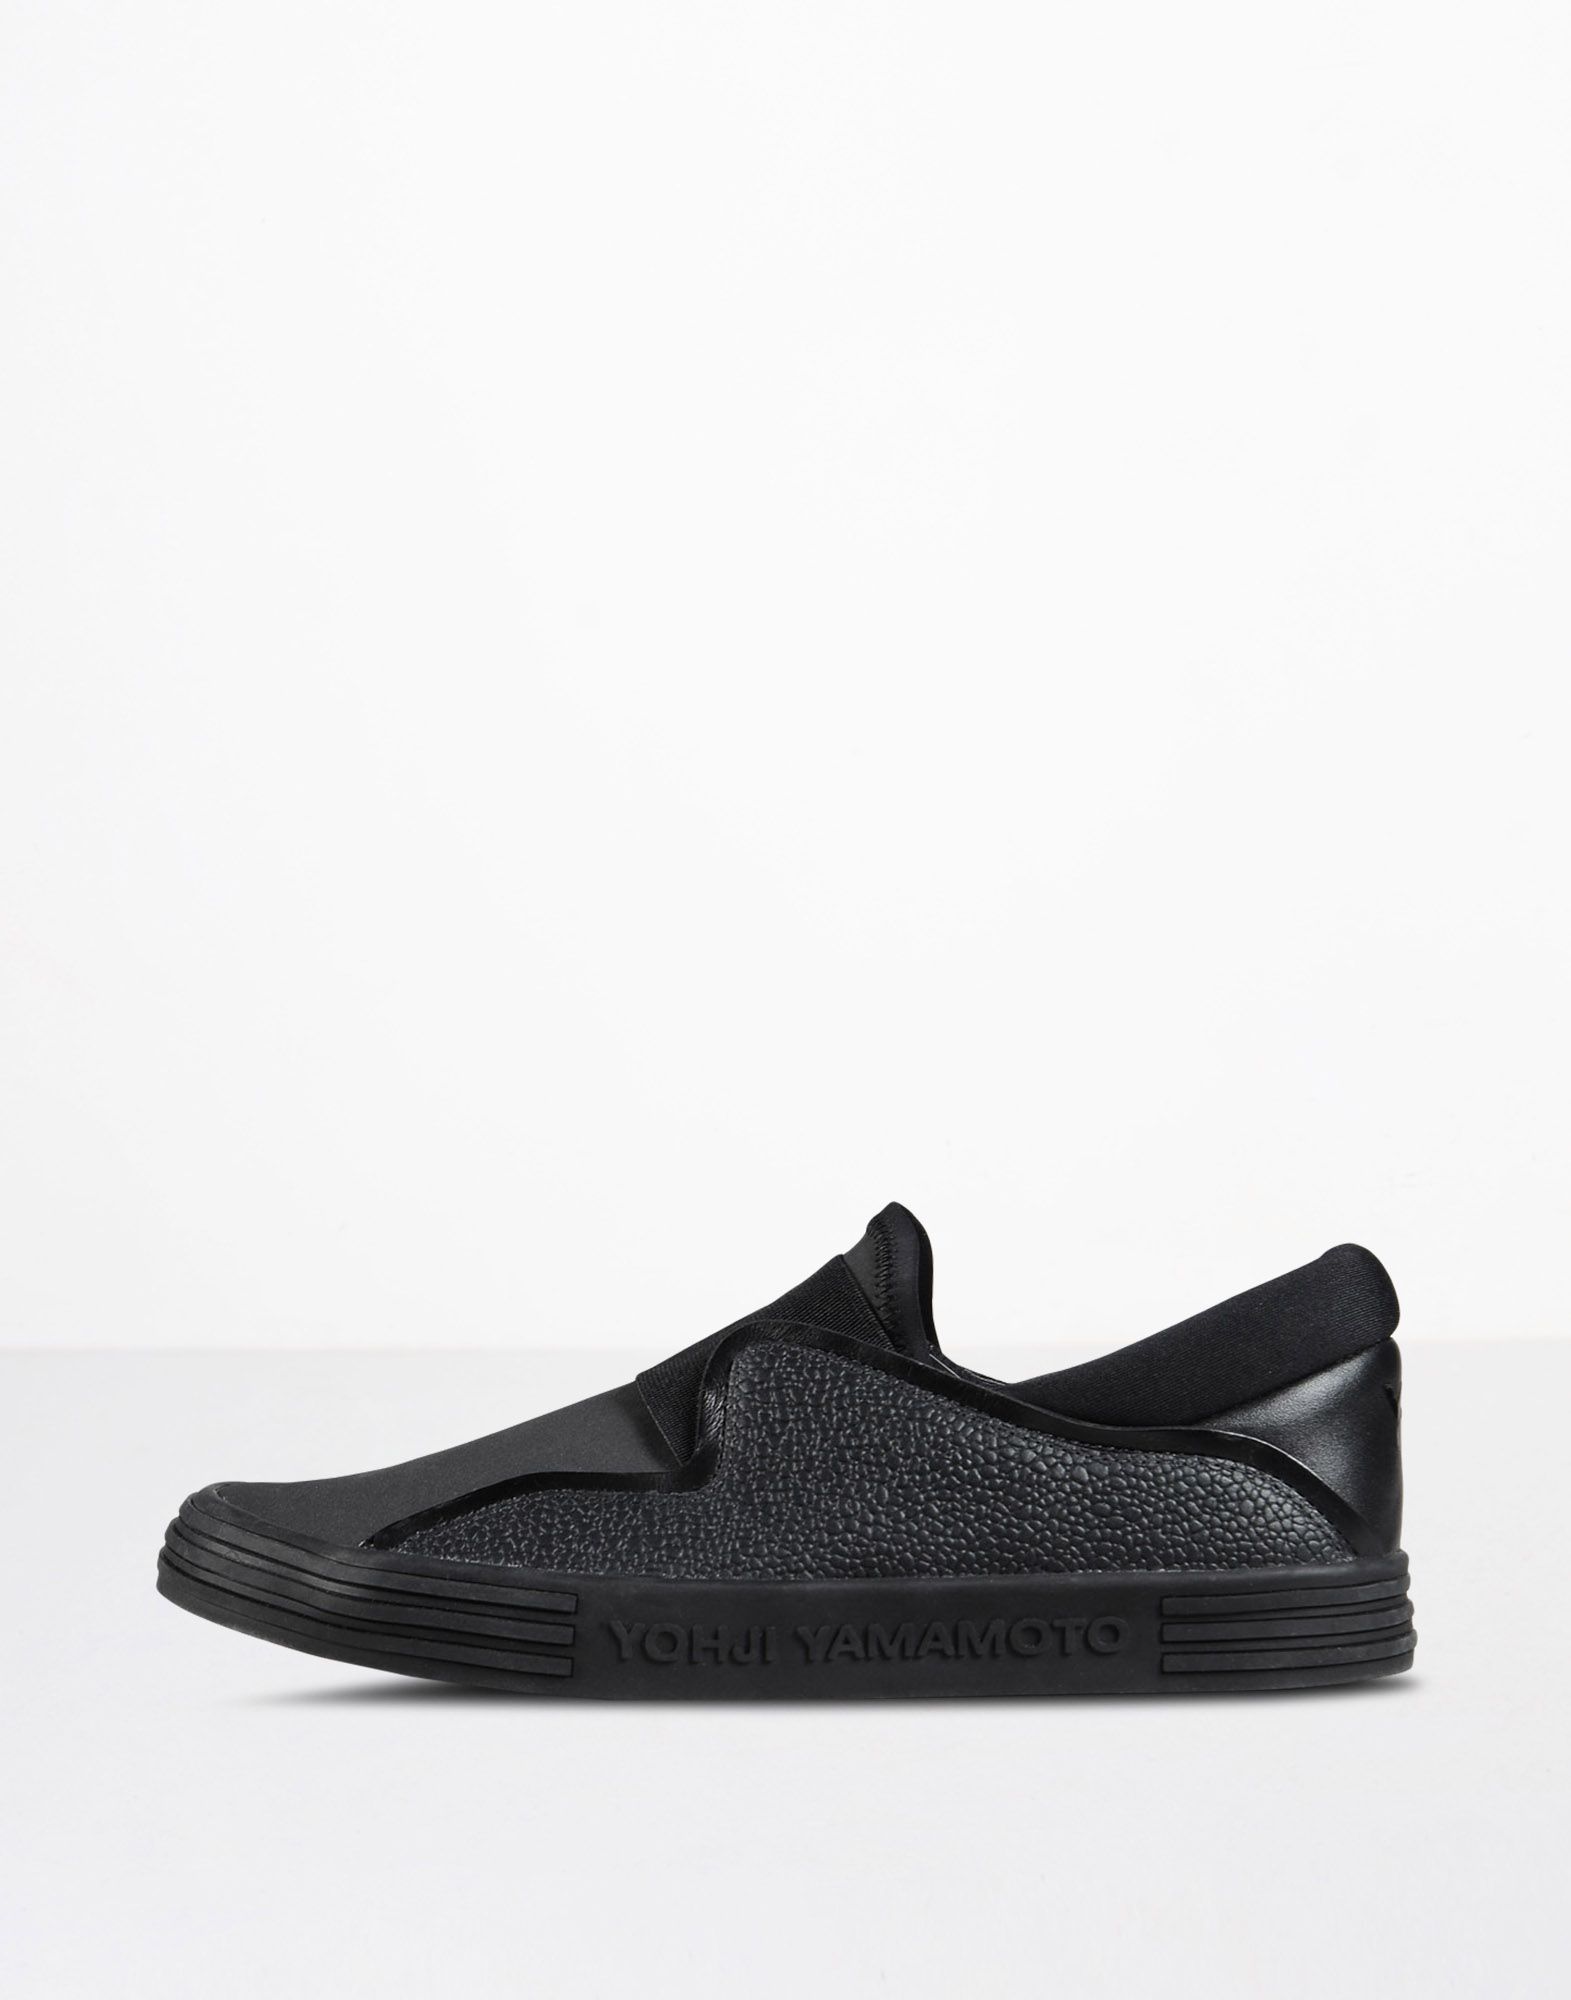 Y 3 SUNJA SLIP ON for Women | Adidas Y-3 Official Store